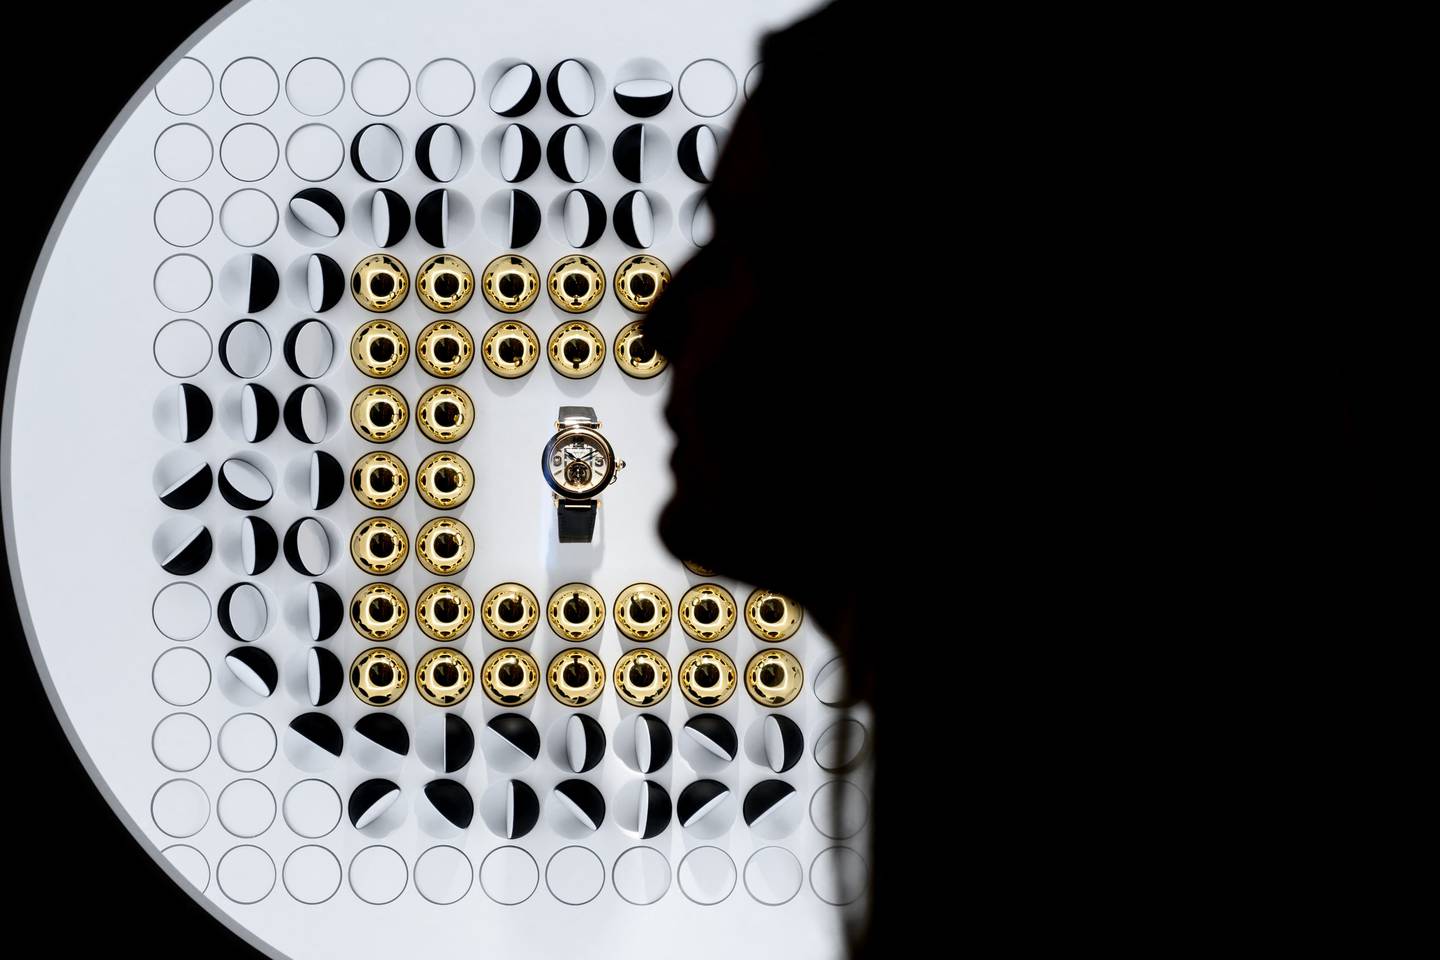 A watch from French luxury goods Cartier, owned by Richemont group, at a recent exhibition in Geneva. Cartier's chief executive said China, where Richemont has about 3,000 employees, could face a 'repeat of 2020' if Covid infections accelerate. AFP